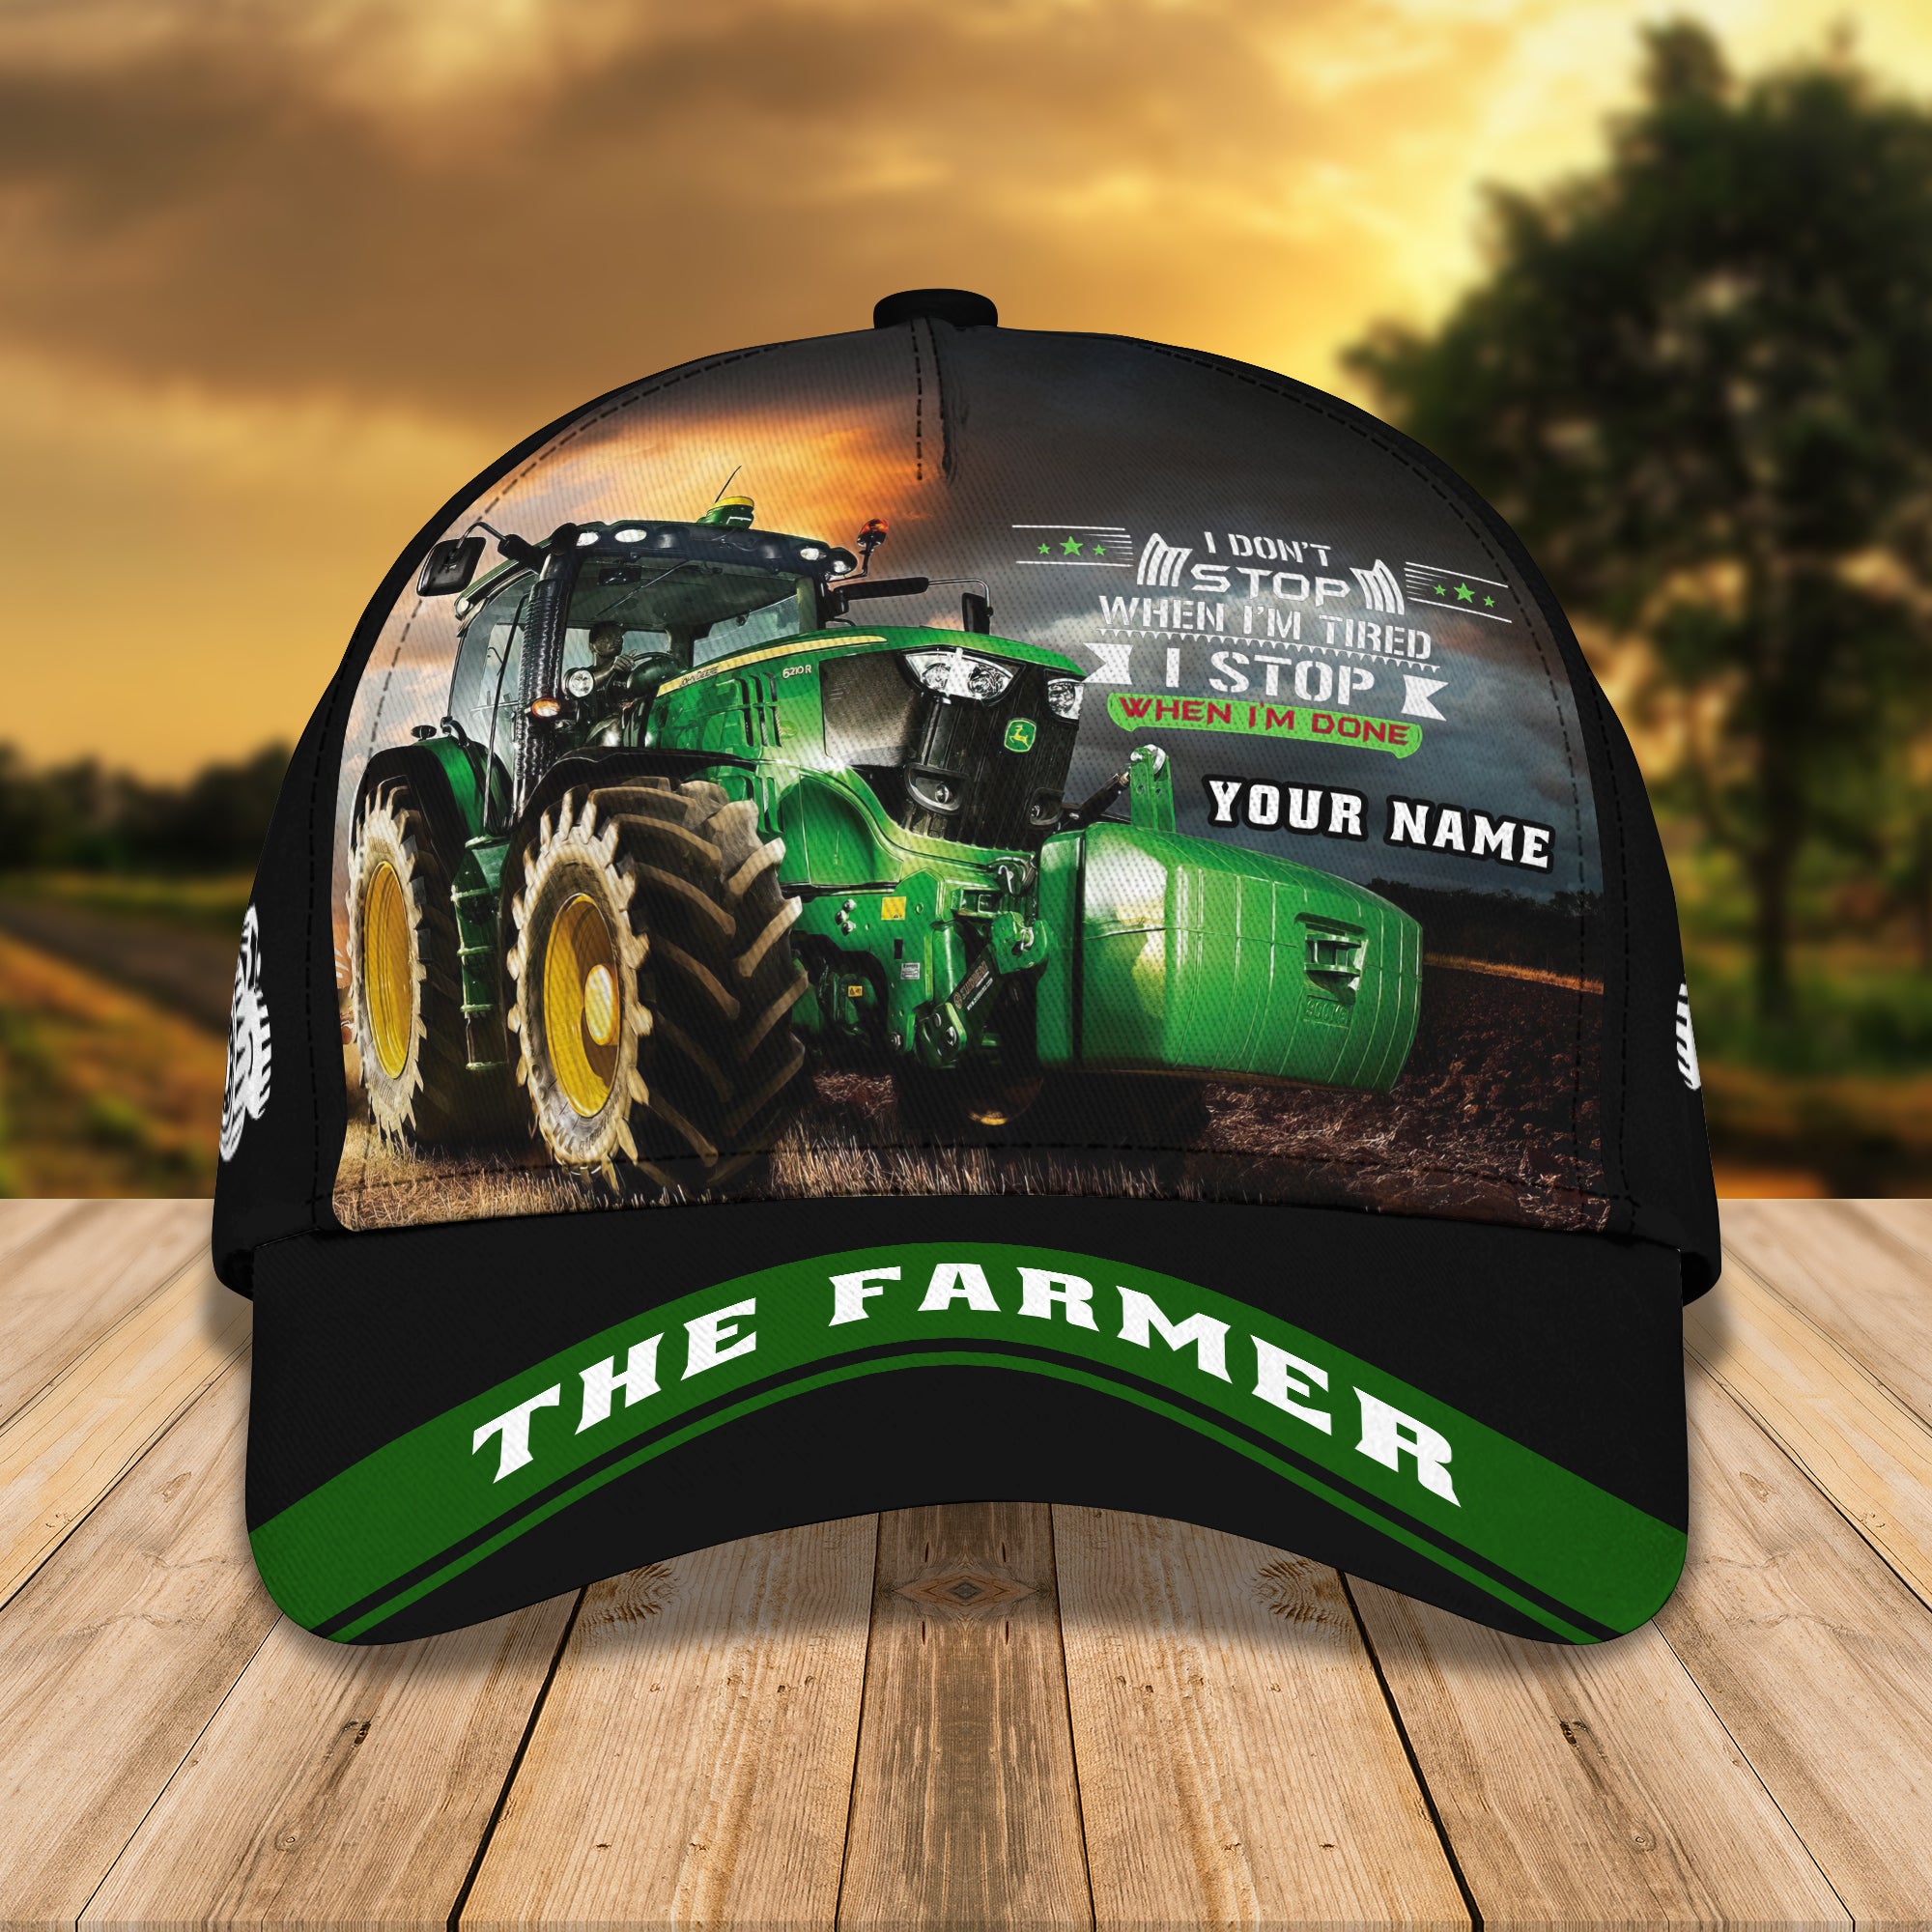 The Farmer - Personalized Name Cap 23 - Tad